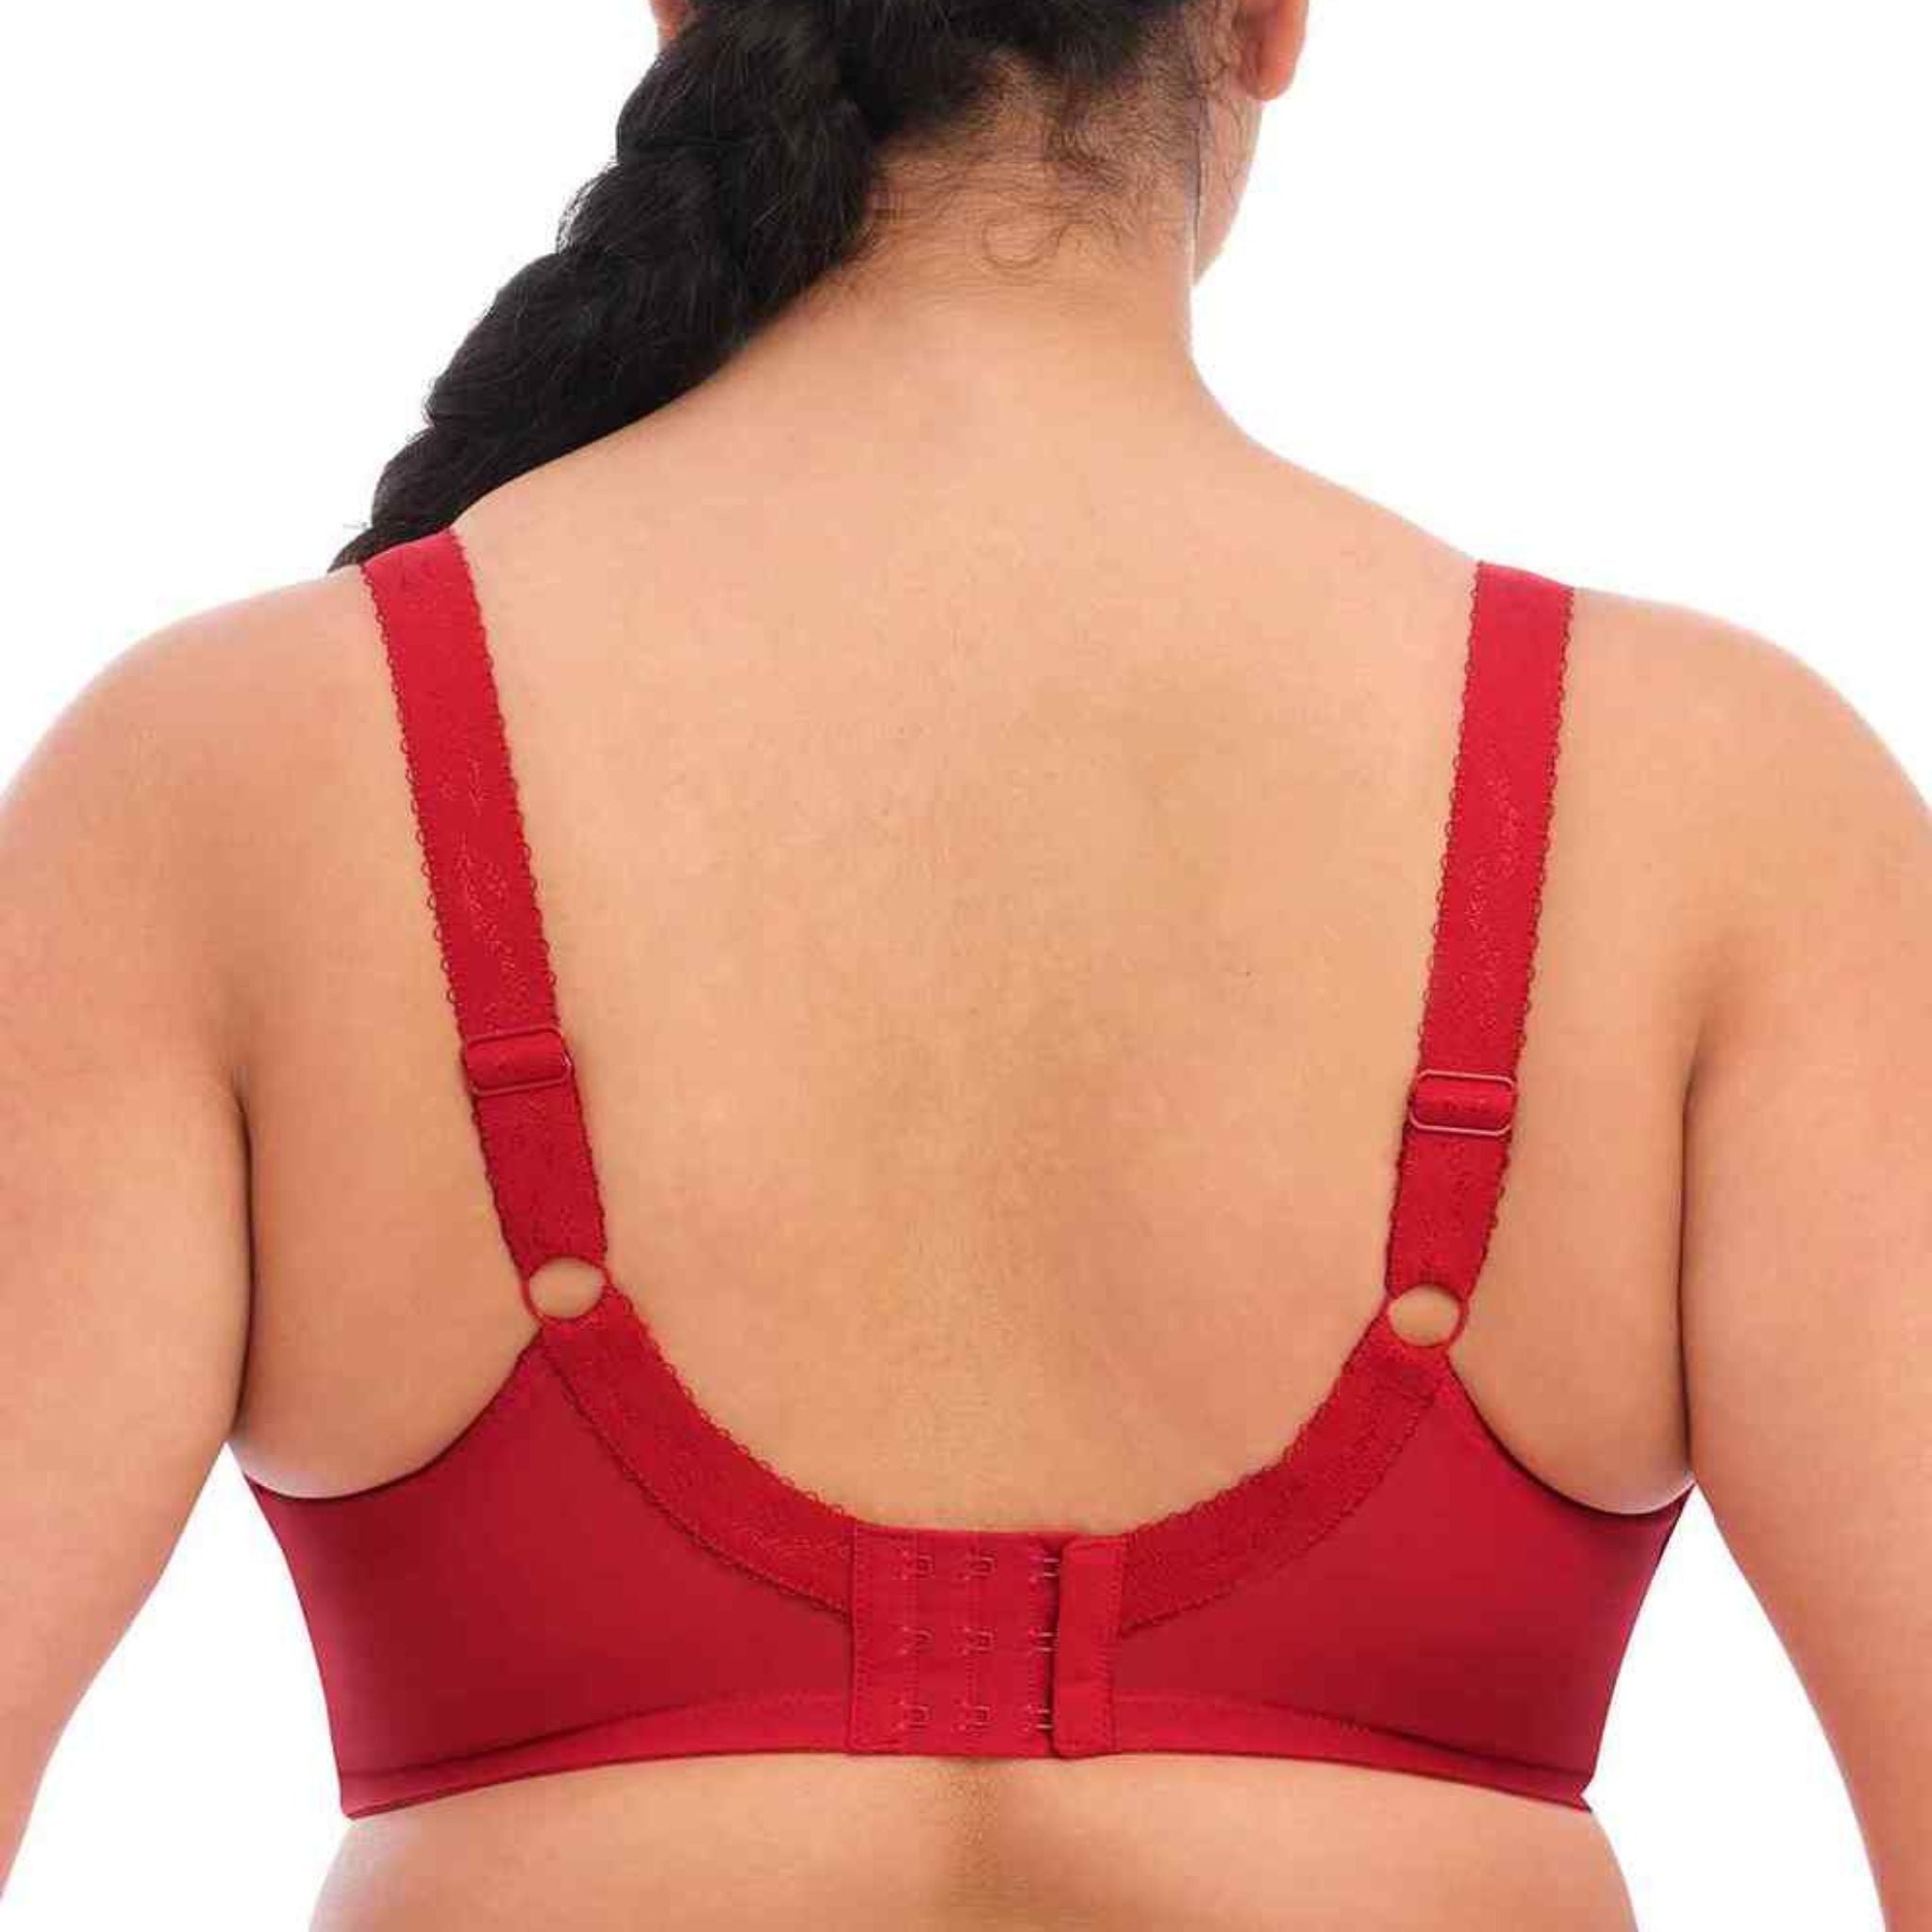 For a bold and beautiful look, explore Elomi's Morgan Banded Bra in an Haute Red hue. With its stretch lace and bow detailing this easy-to-wear bra is sure to become an Elomi favourite.